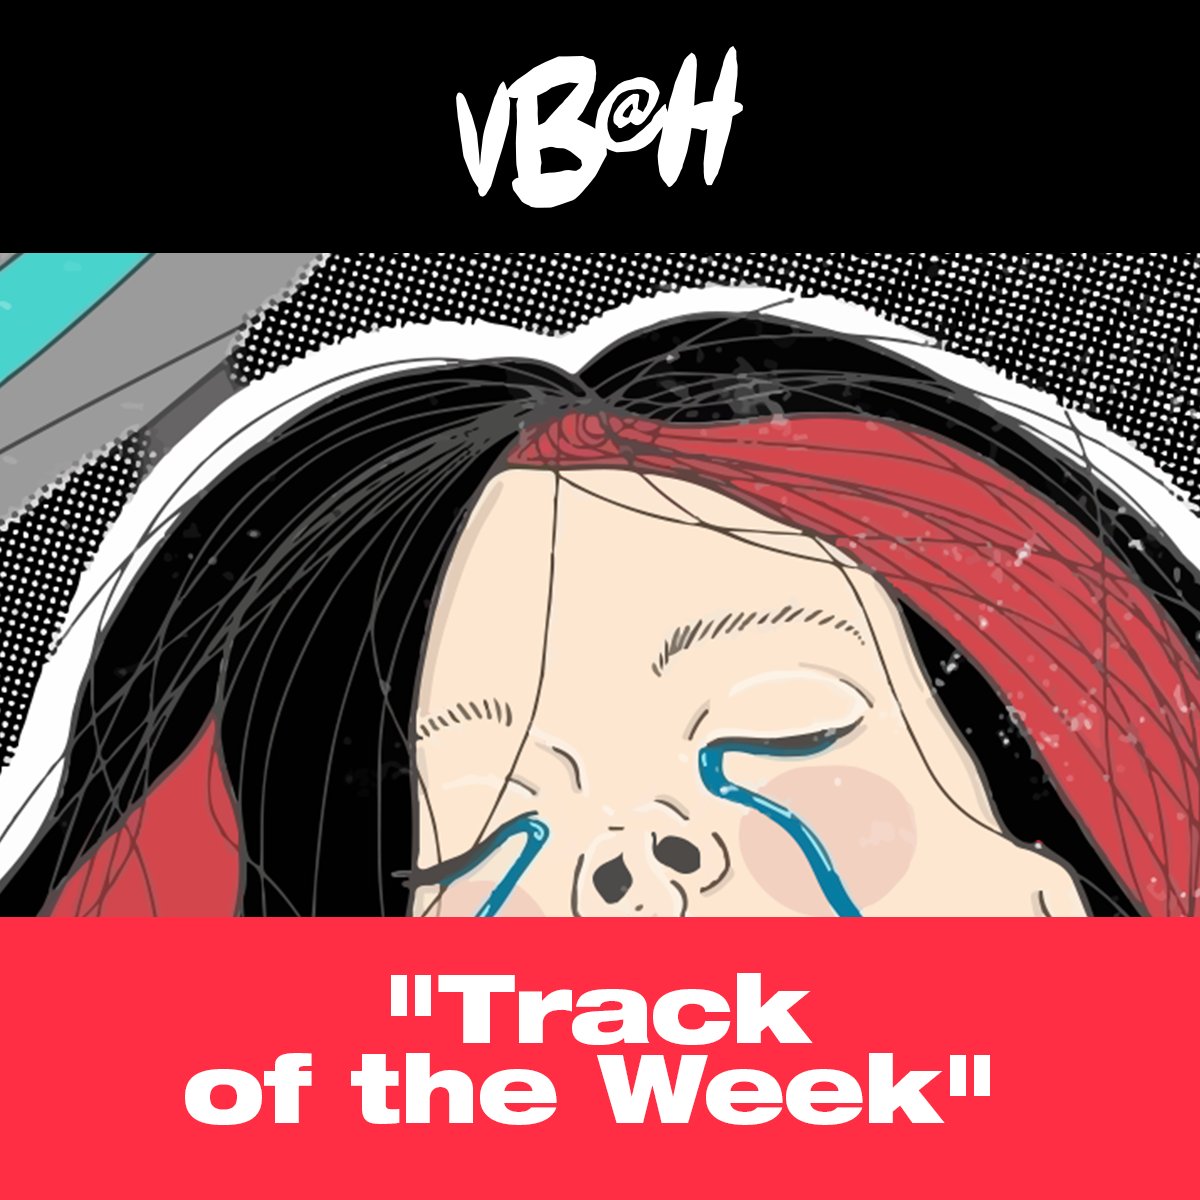 Big thanks to @VBAHfanzine for making 'I Am The White Stripes' their track of the week!!!! x Stream/Merch: linktr.ee/nihilists